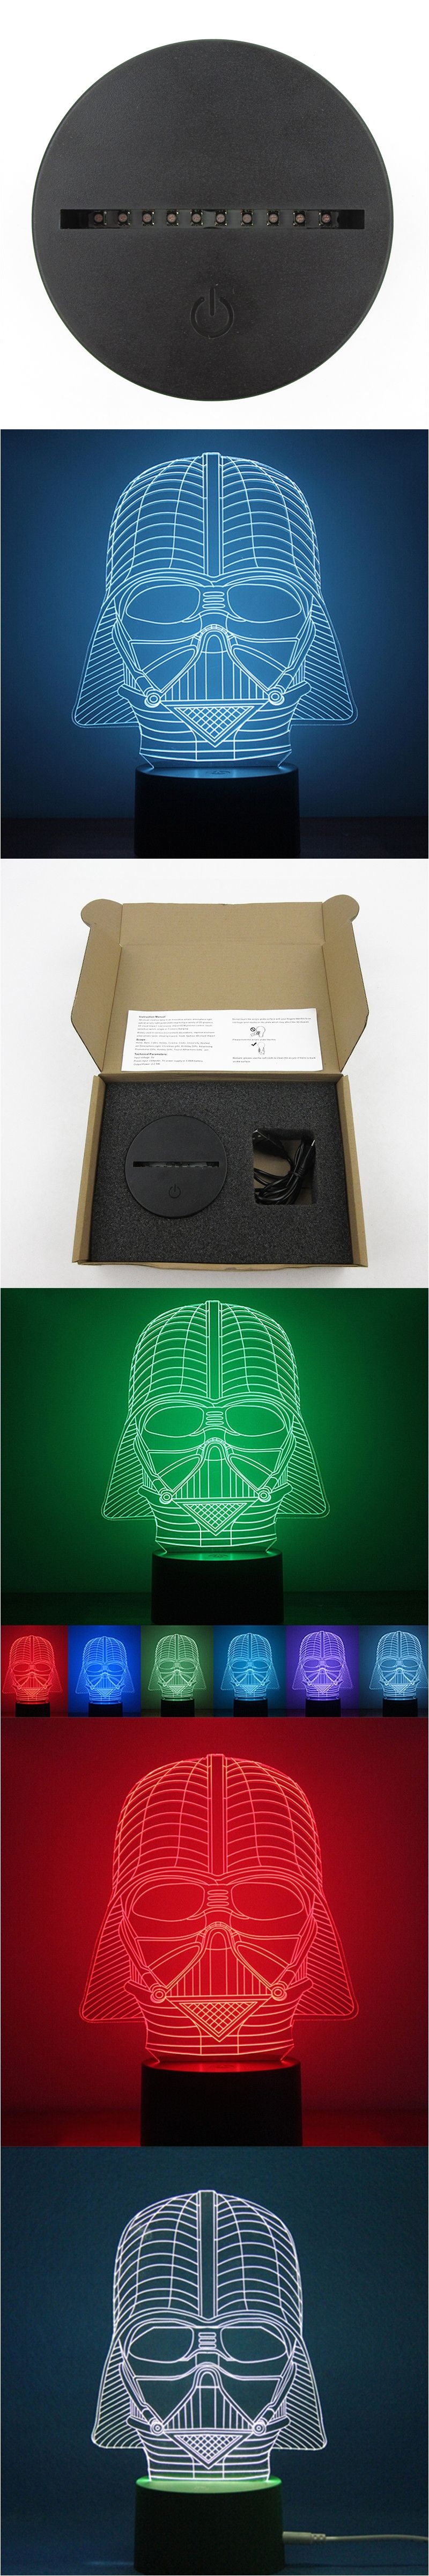 3d visual led light darth vader star wars table lamp touch usb plastic base